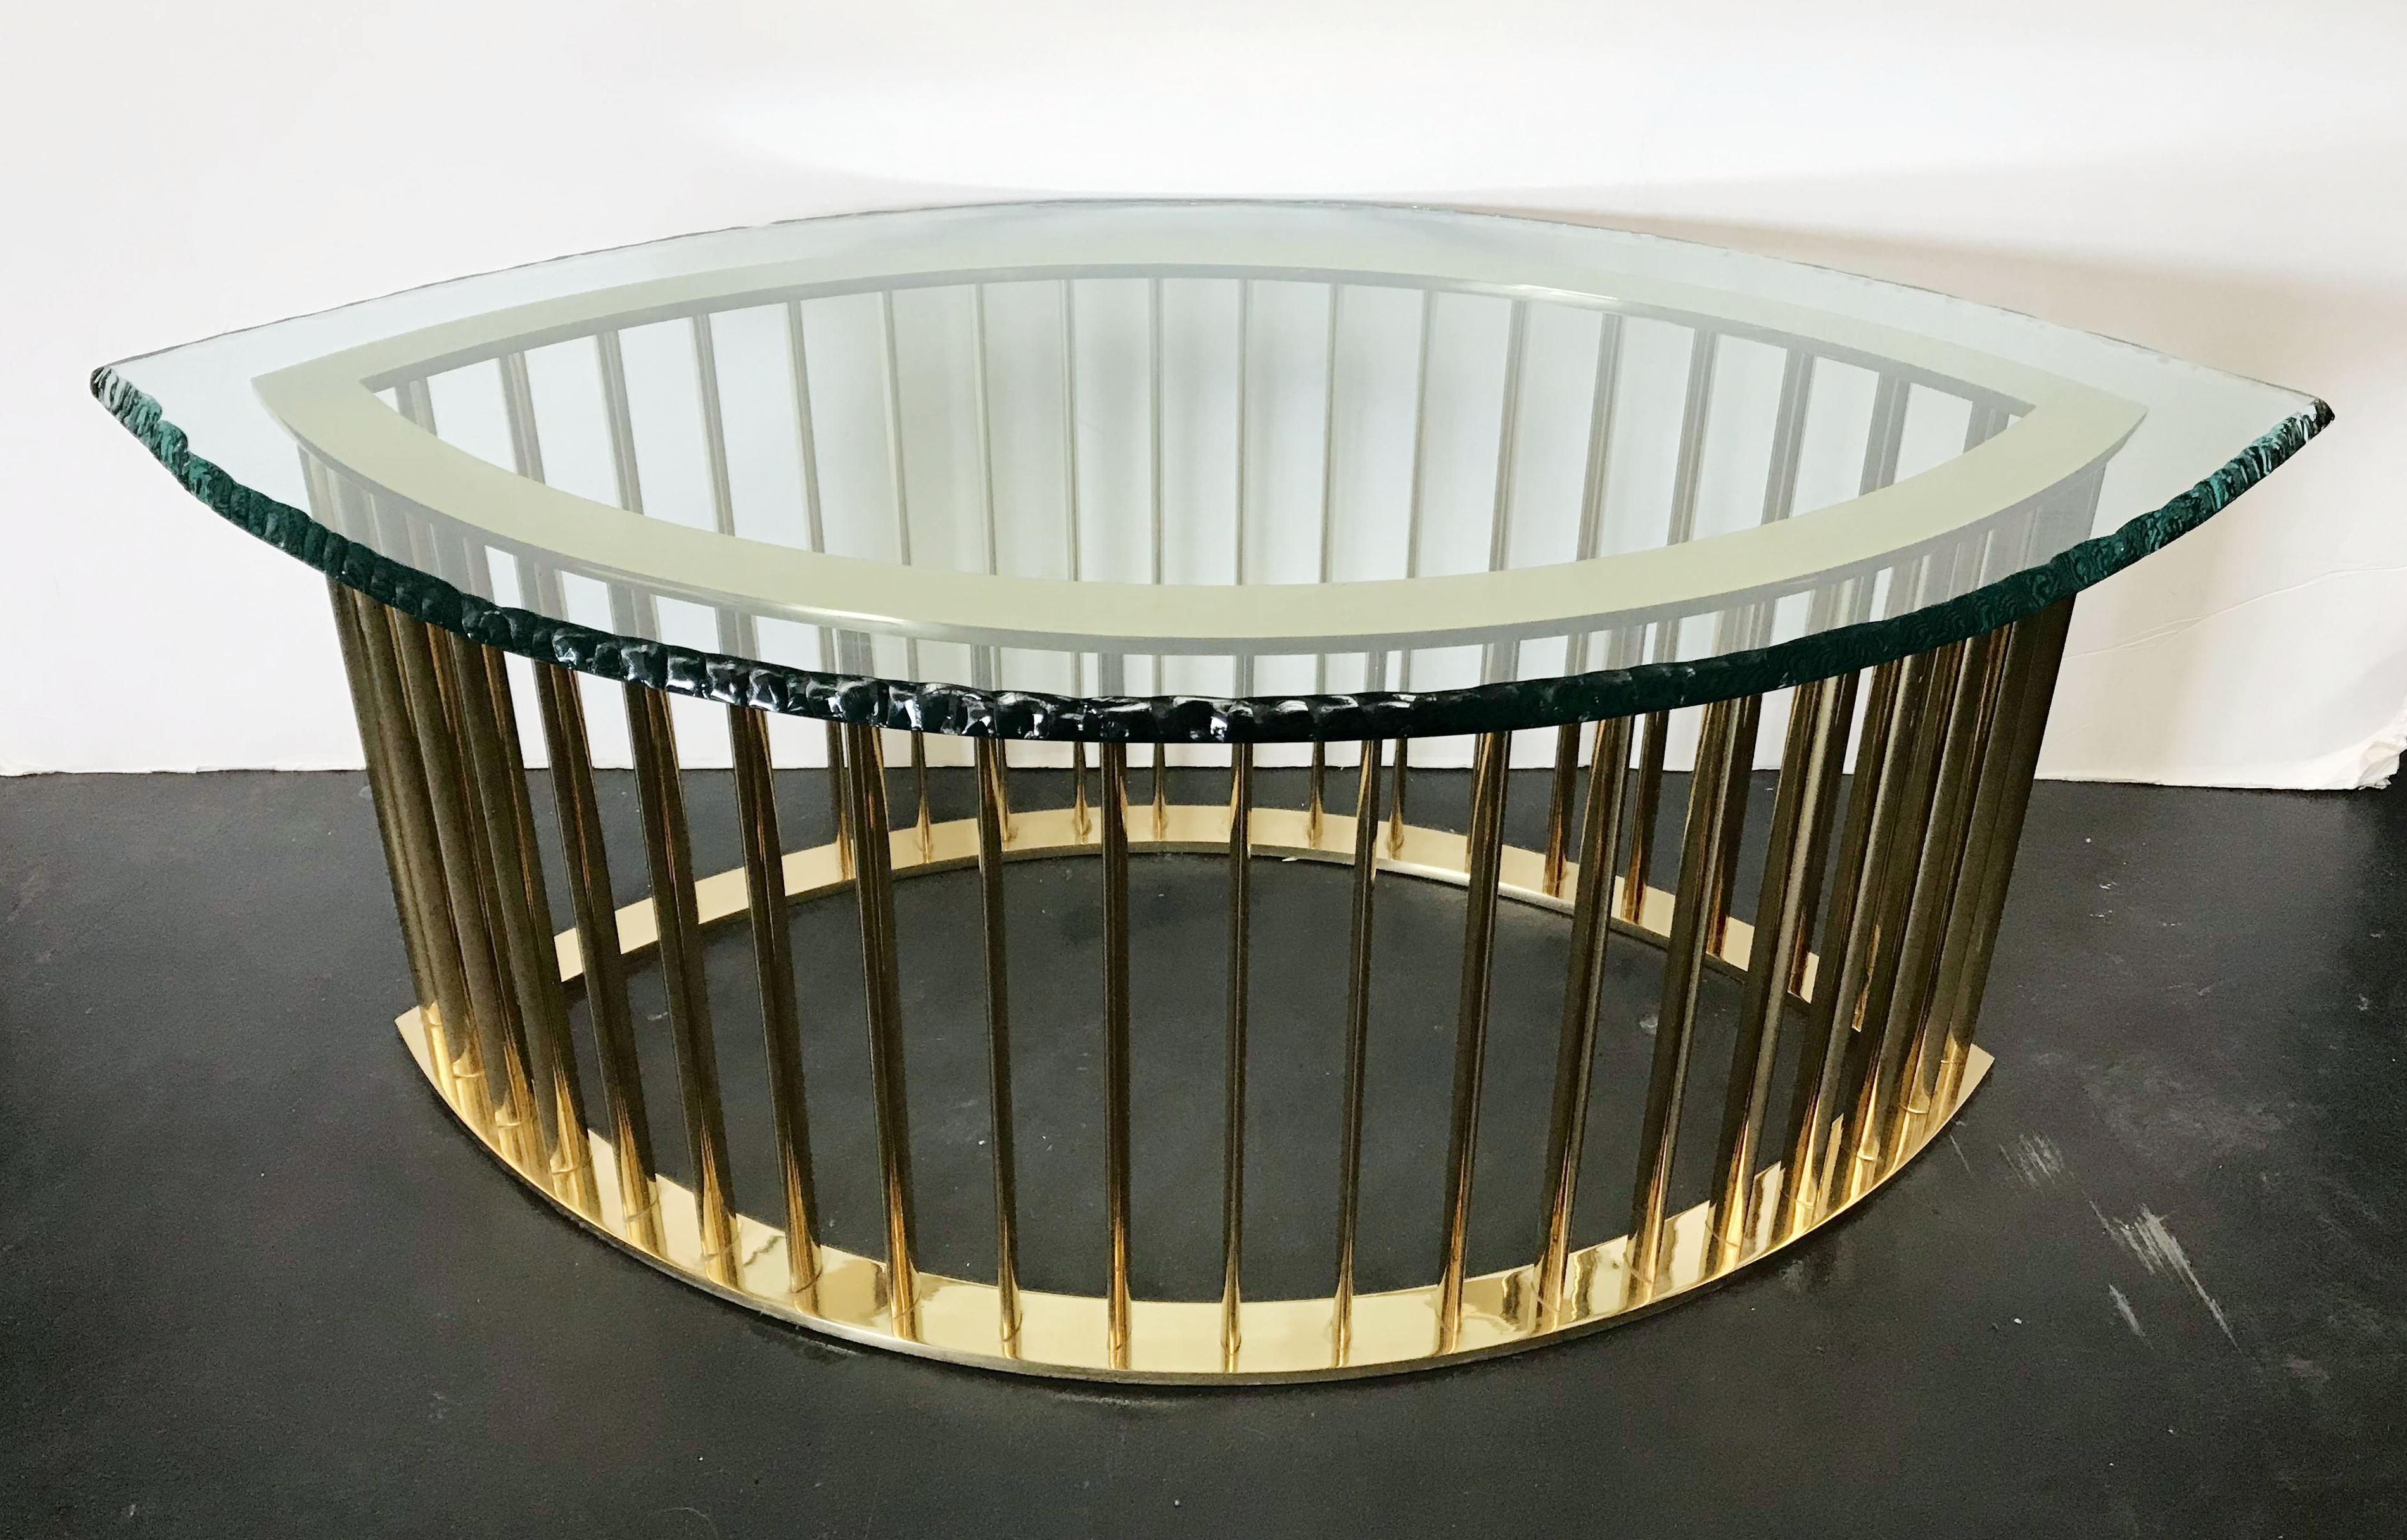 Limited edition coffee table with thick etched glass top and polished brass base with elegant oval shaped vertical bars / Exclusively designed by Gianluca Fontana for Fabio Ltd / Made in Italy
Measures: width 47 inches / depth 28 inches / height 18